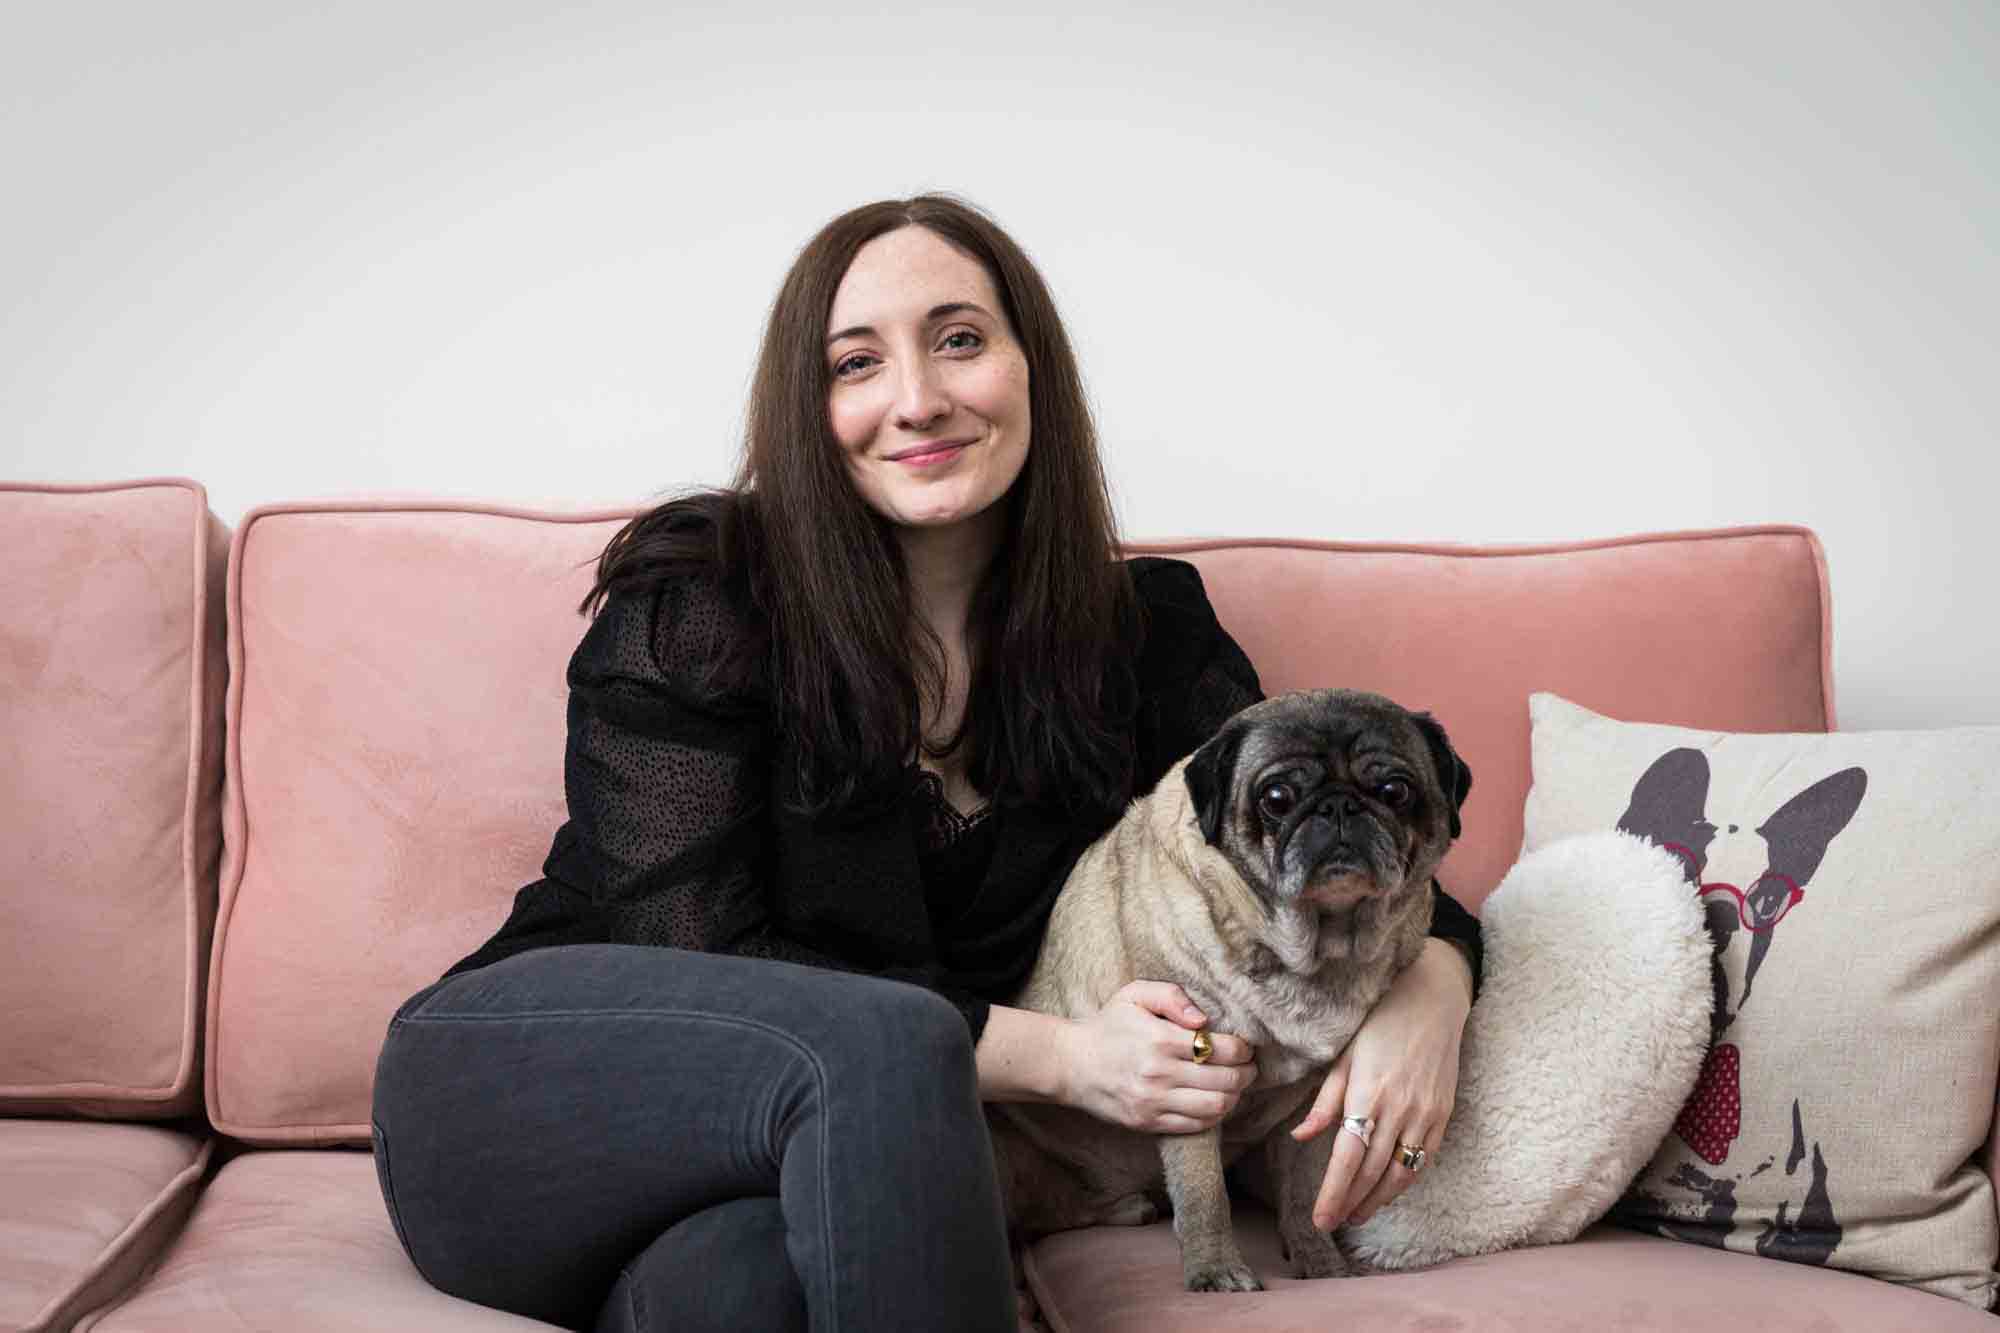 Author Jiordan Castle sitting on pink couch with pug dog